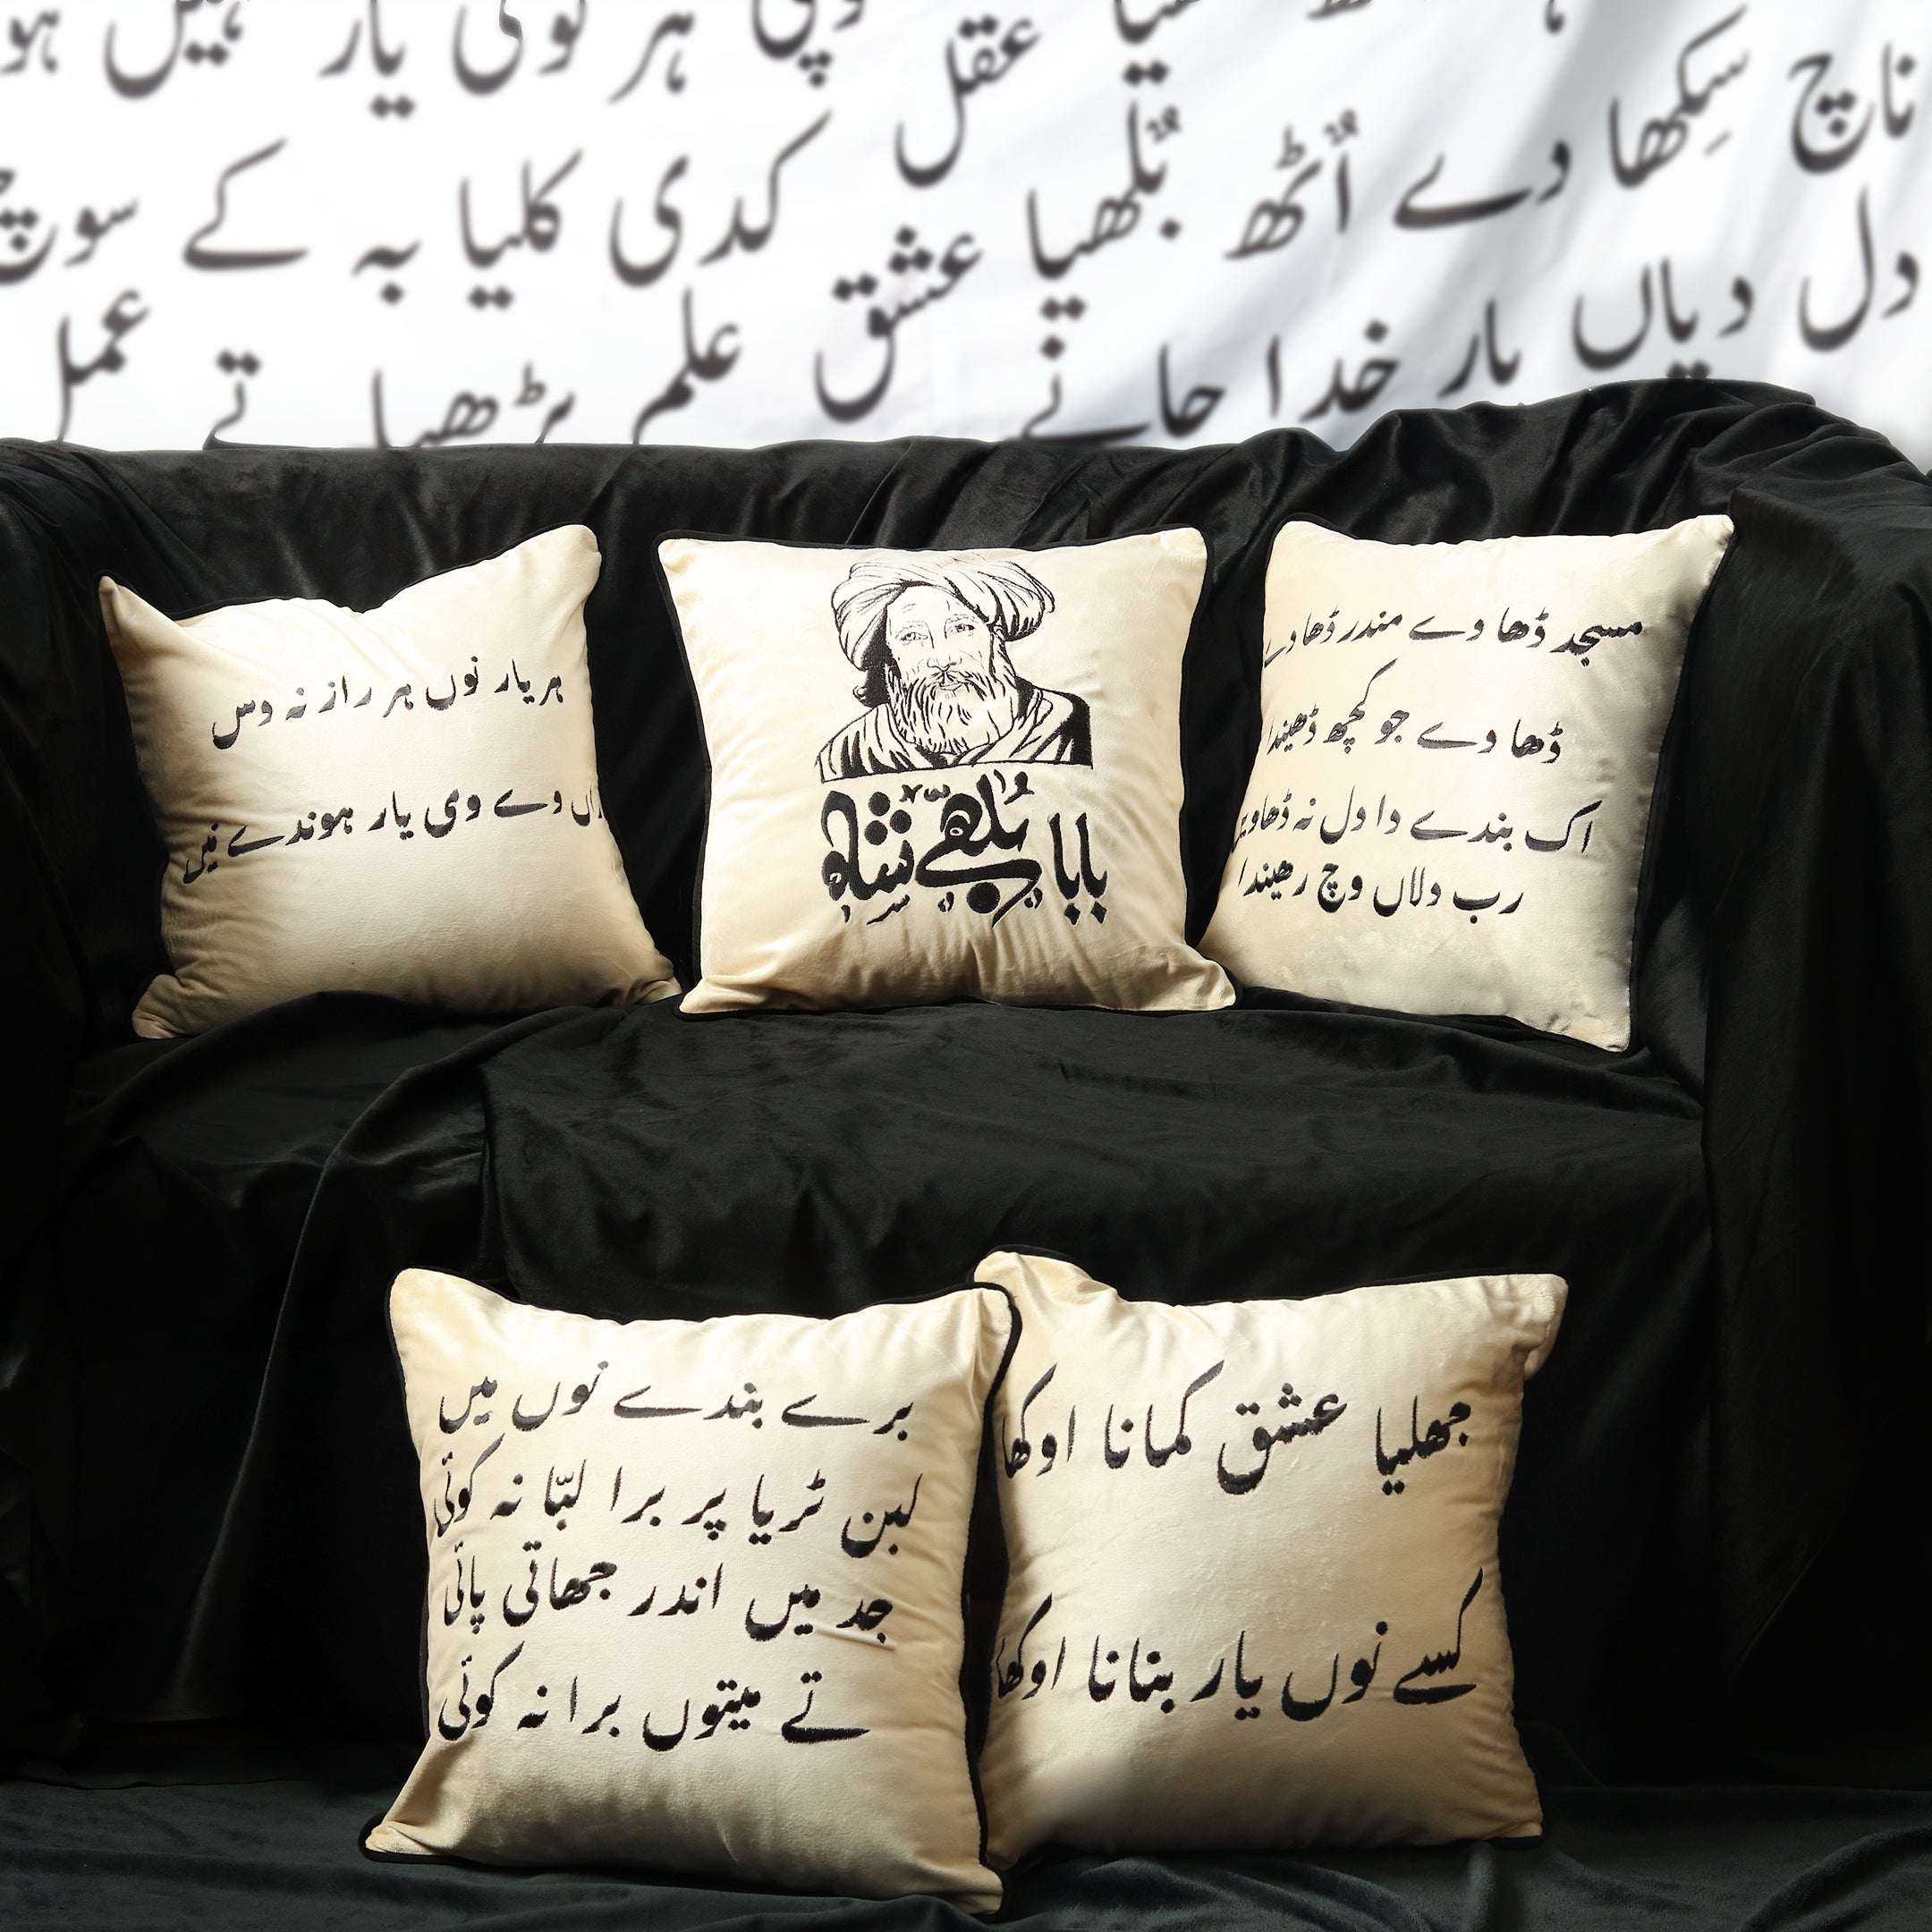 Baba Bulleh Shah – Embroidered Cushion Cover Set